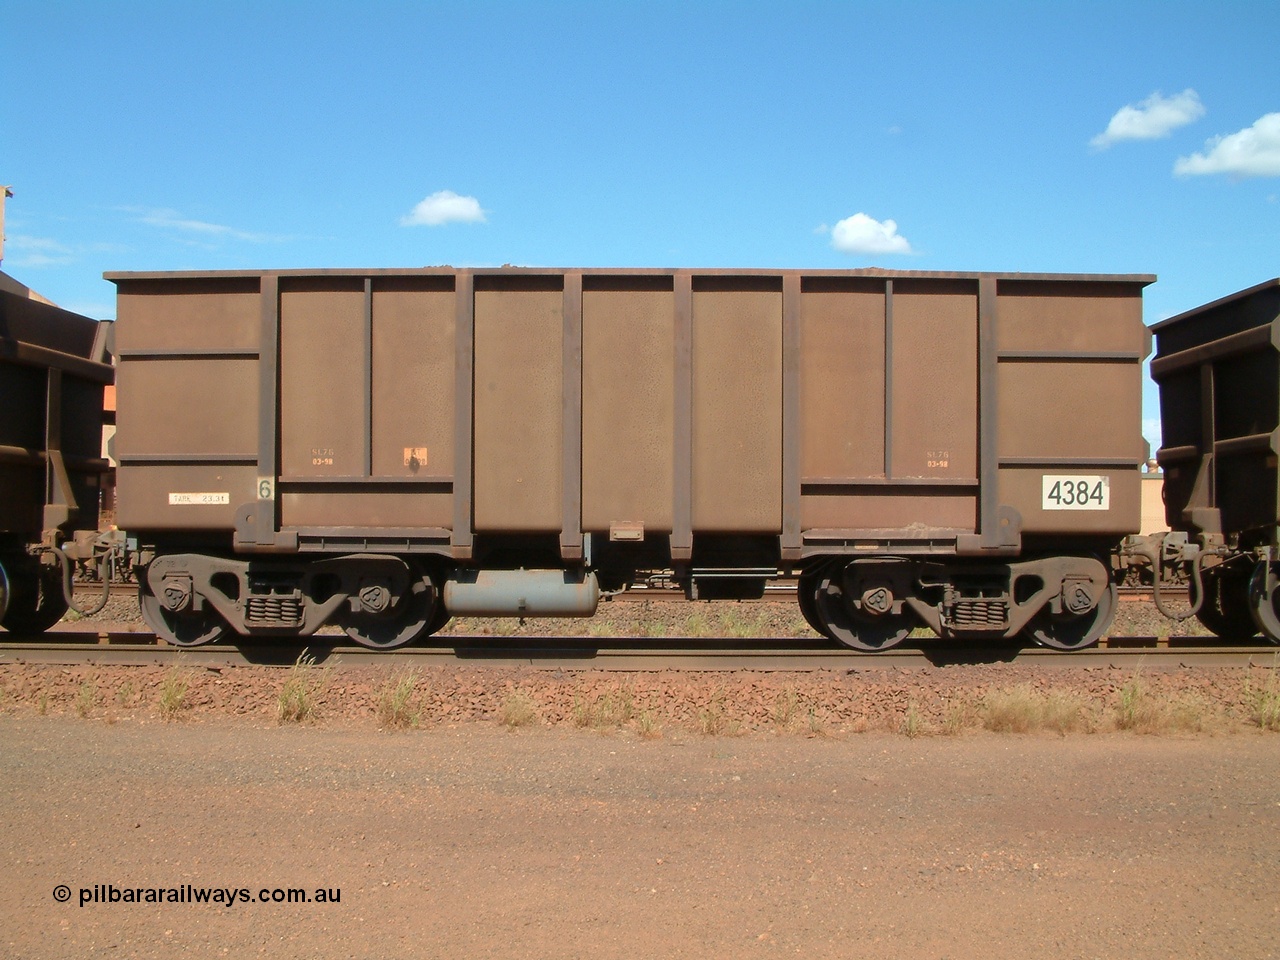 040412 143234
Nelson Point, a Goninan built ore waggon 4384, one of 126 such waggons constructed during 1997 out of 3CR12 stainless steel in an effort to eliminate painting and to reduce wear on the waggon body. Note the rounded bottom edge and tapered floor, this design was designated HC7081. 12th April 2004.
Keywords: 4384;Goninan-WA;BHP-ore-waggon;